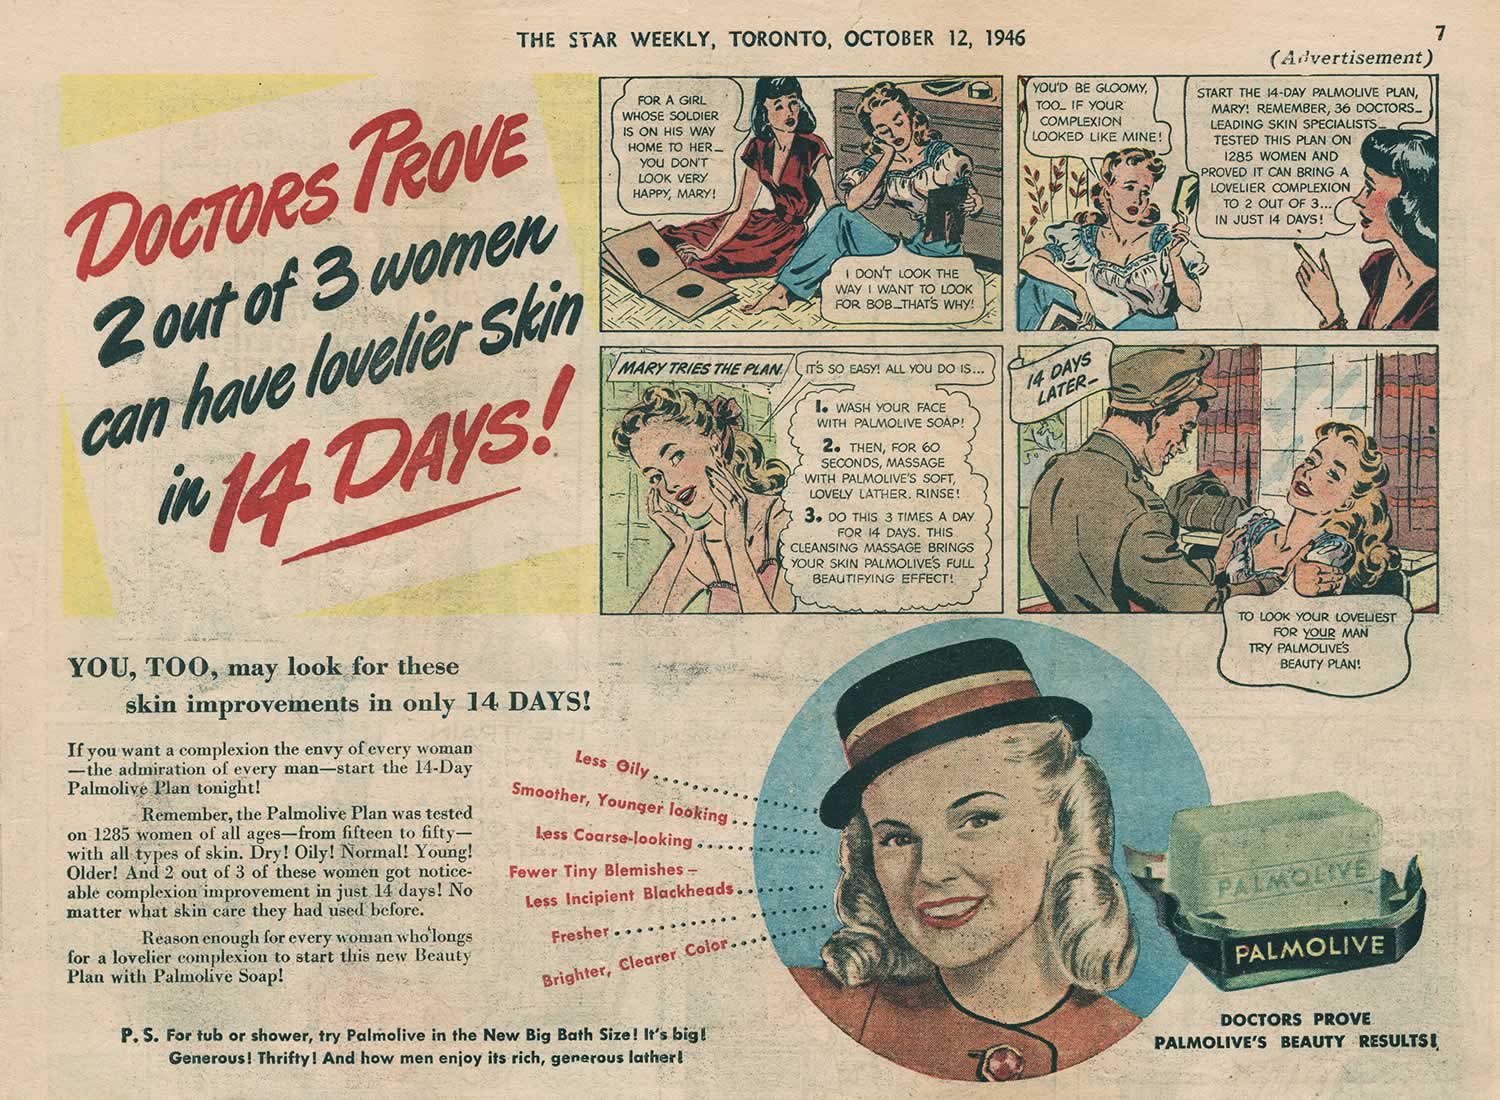 Colour image of newspaper page, featuring three cartoon advertisements. All are geared towards women promising better skin, sparkling teeth, glamorous hair, and romance.